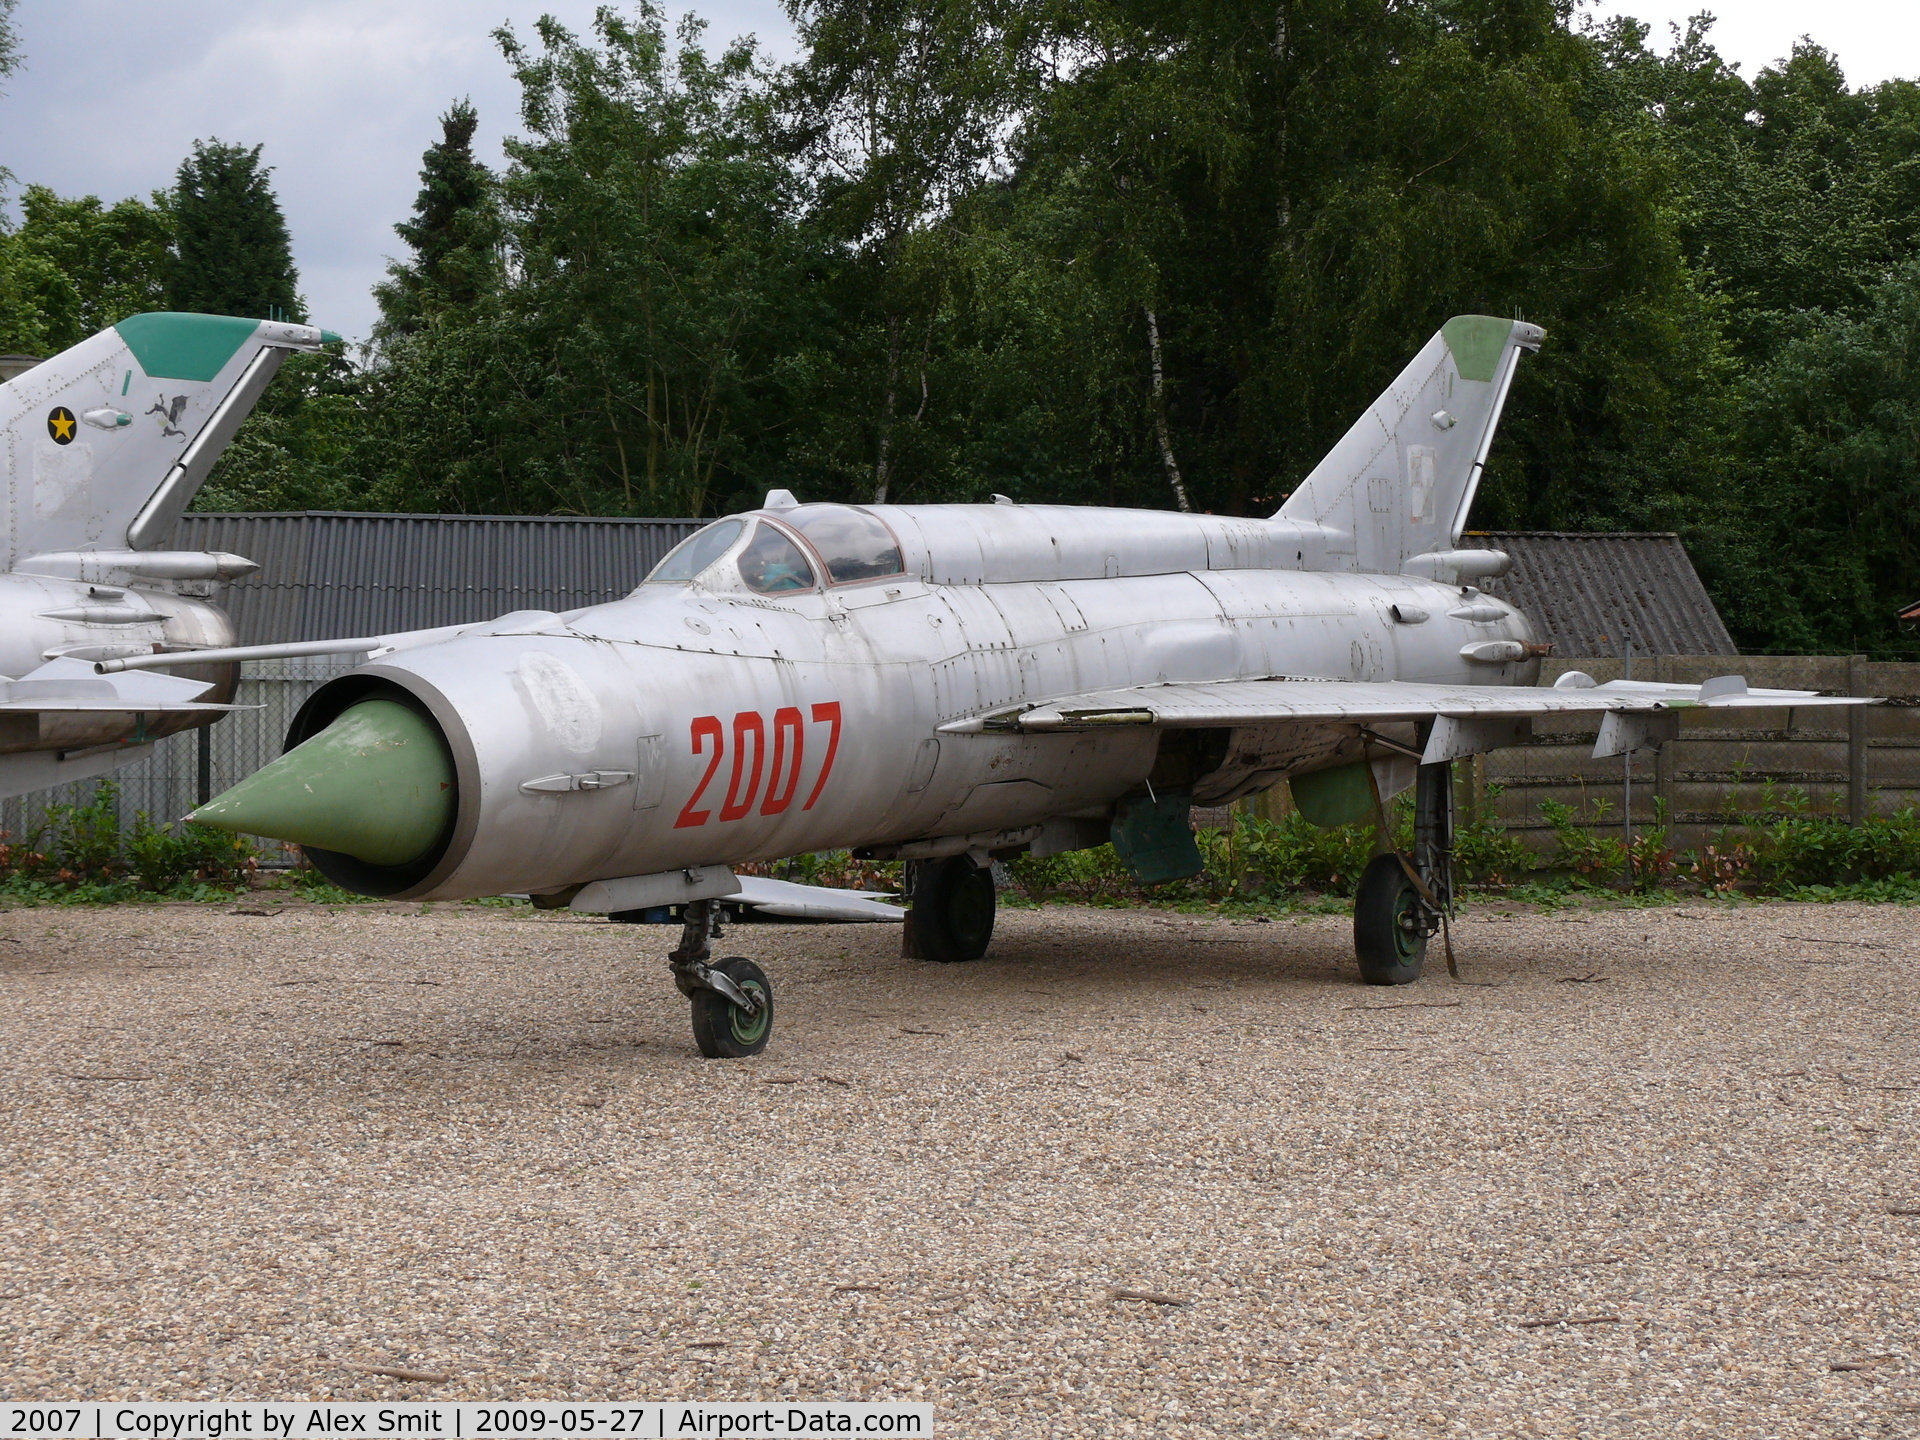 2007, 1996 Mikoyan-Gurevich MiG-21M C/N 962007, Mikoyan Mig21M Fishbed 2007 Polish Air Force part of the collection of Mr Piet Smets from Baarlo (PH) and stored in a small compound in Kessel (PH)